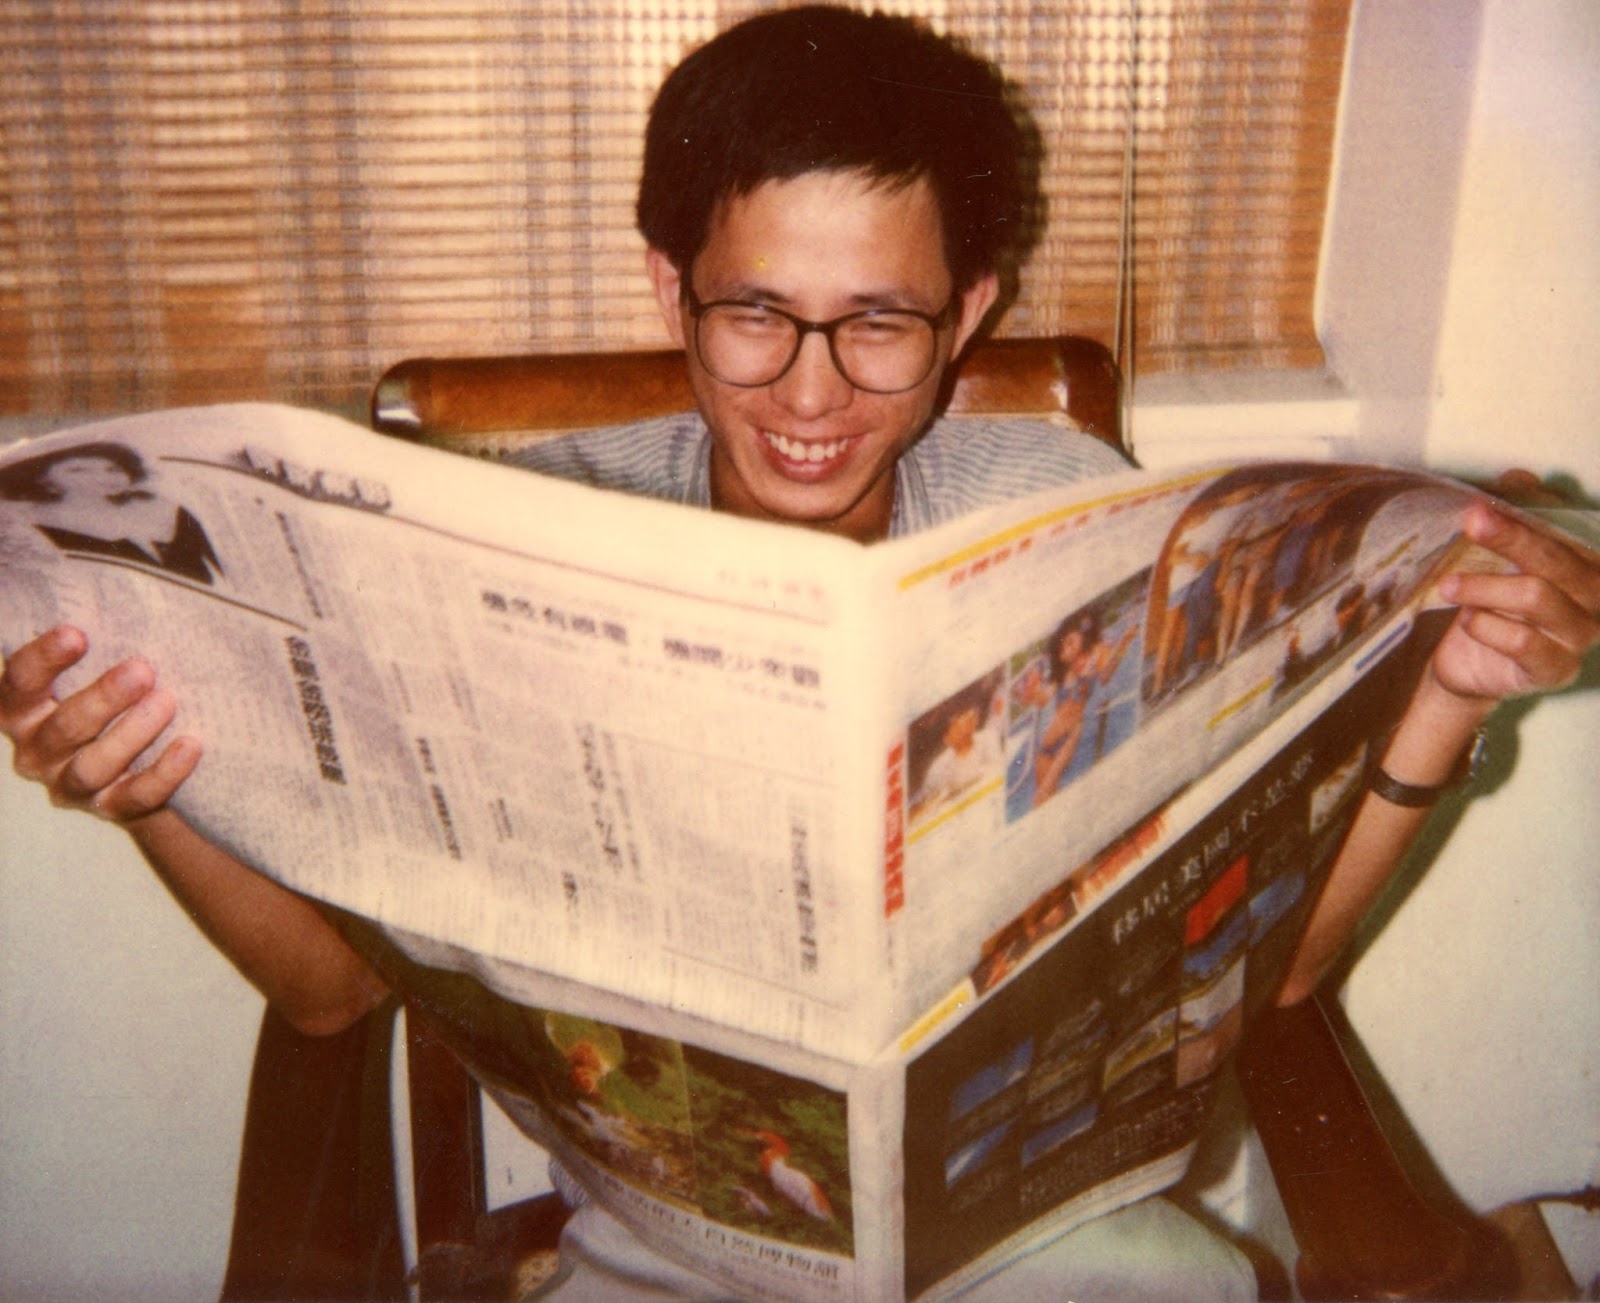 <p>Serves as the director of the Art and Literature Section at <i>The Independent Evening Post</i>. Begins research on nature encyclopedia.</p>
<p></p>
<p>Photograph provided by Liu Ka-shiang</p>
<p>Liu at the <i>Independent Evening Post</i> office, 1988.</p>